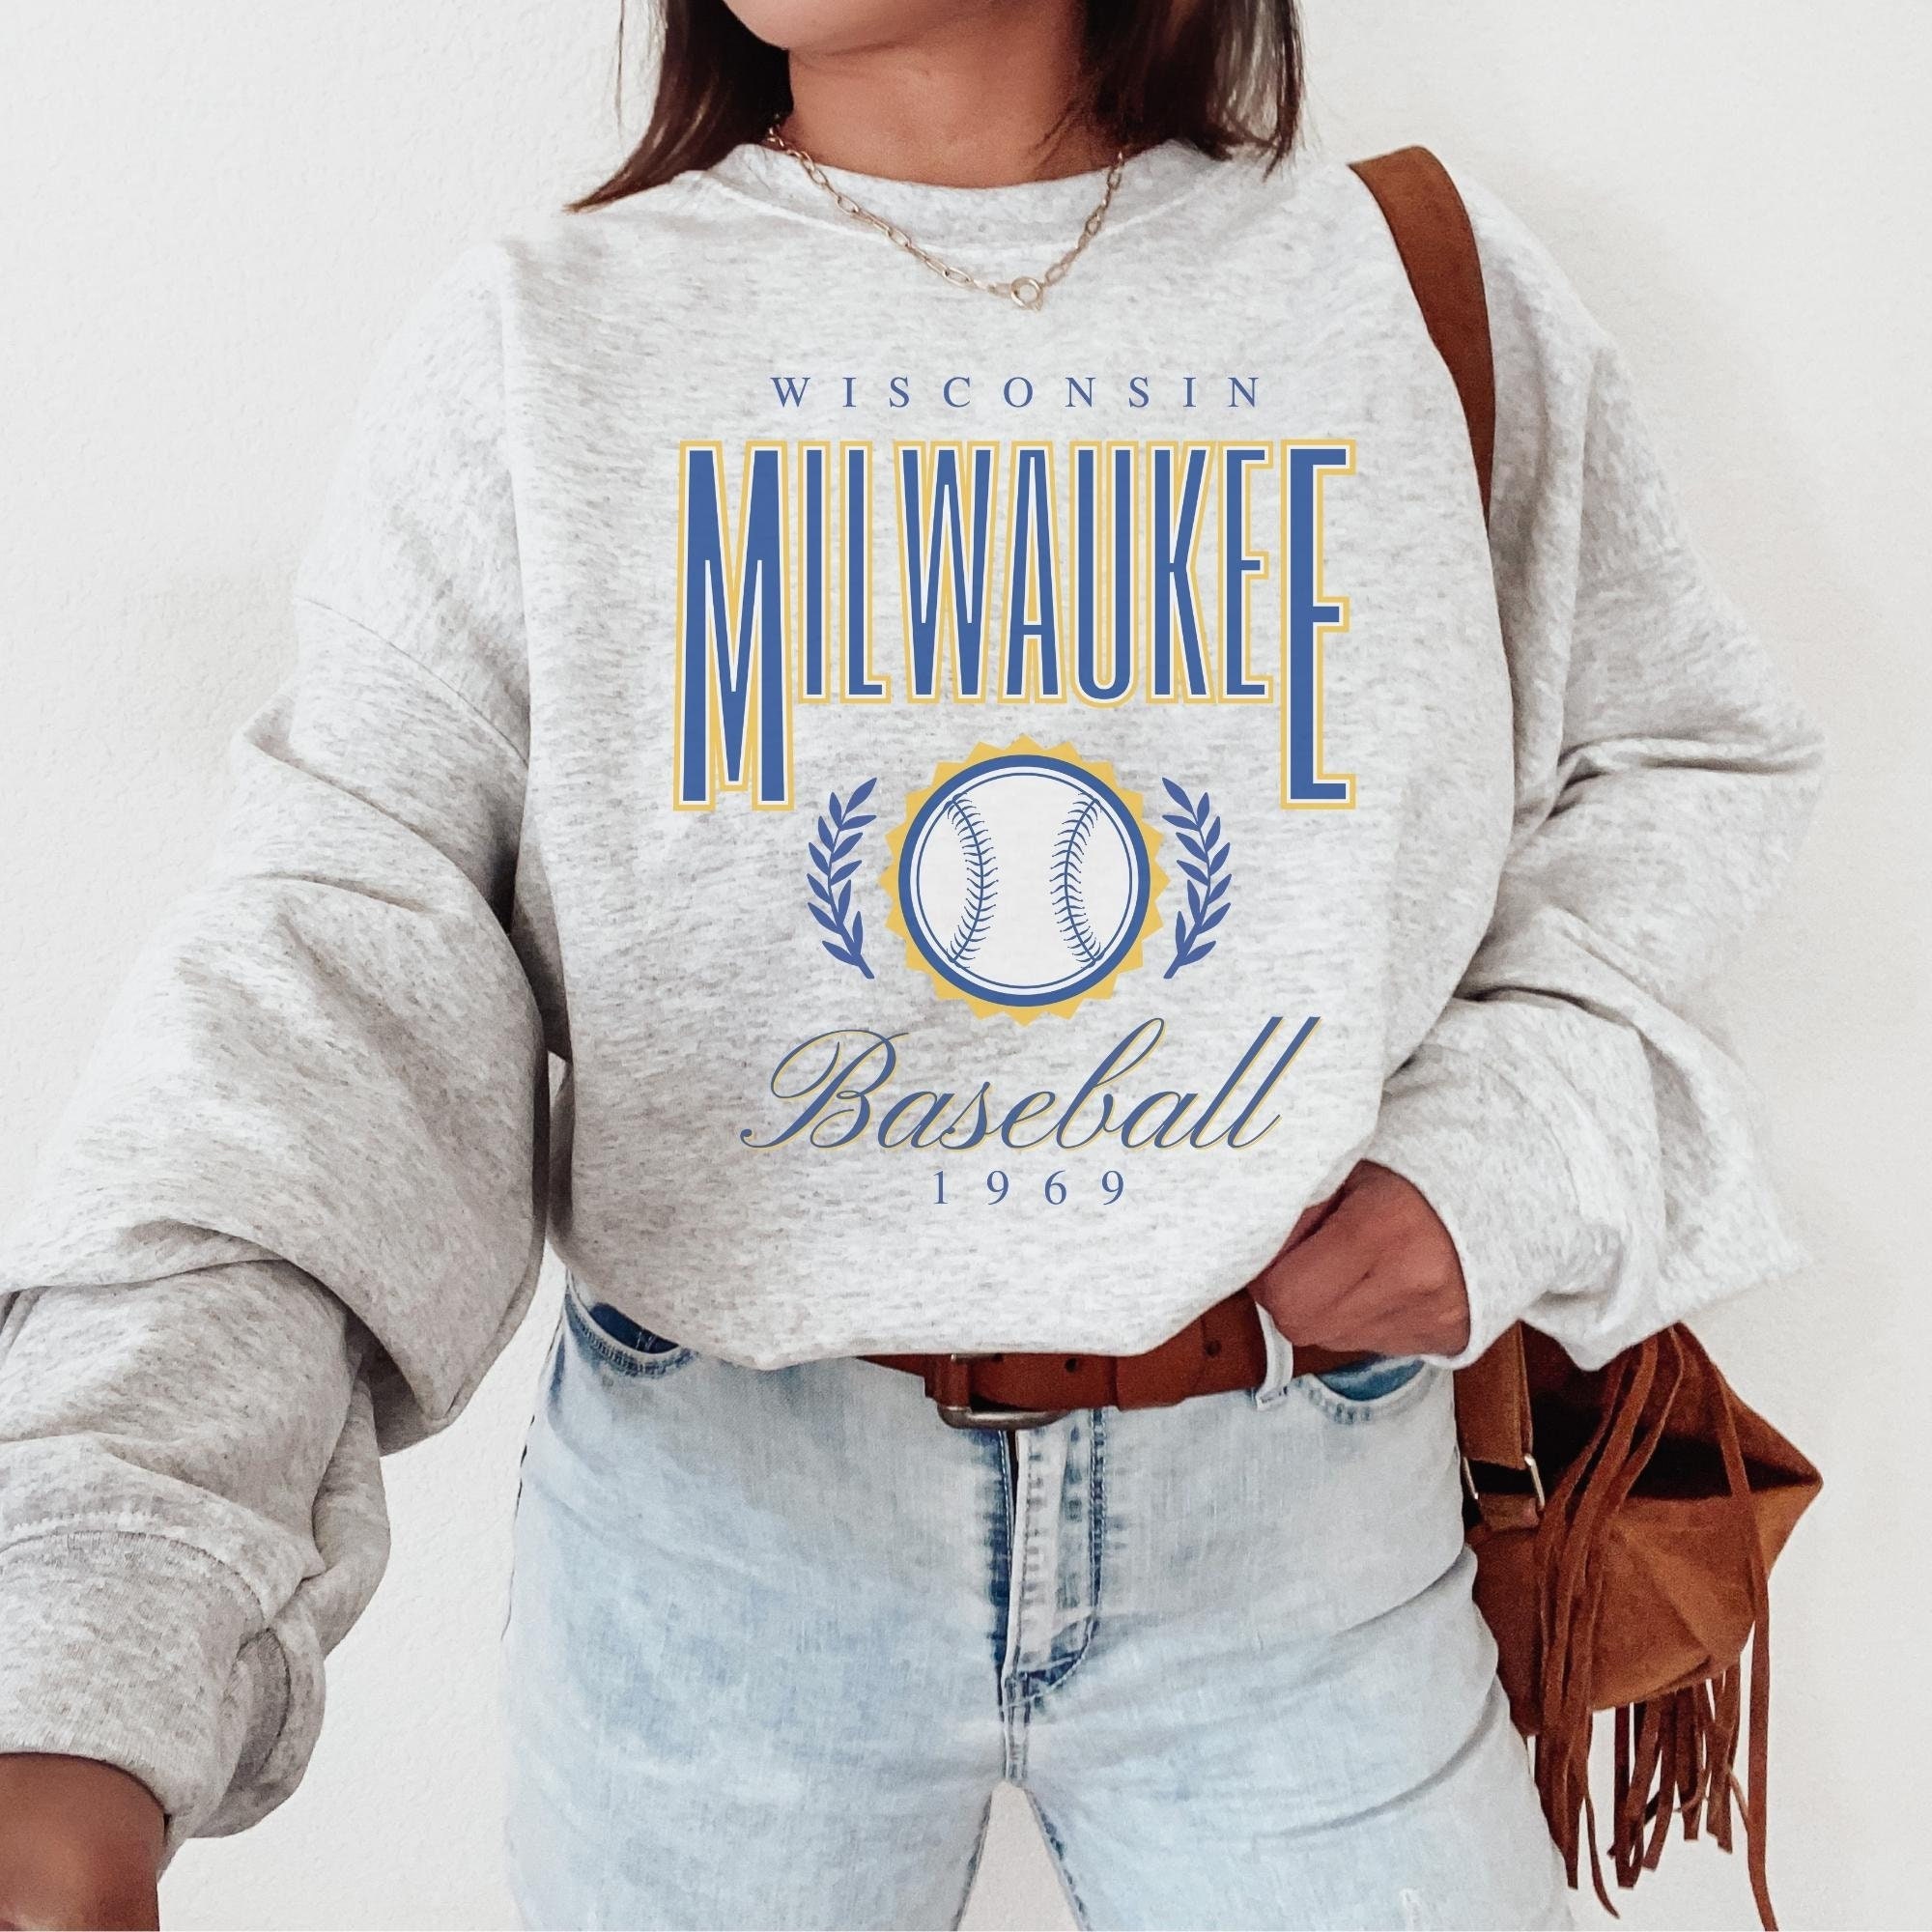 Nike City Connect (MLB Milwaukee Brewers) Women's Racerback Tank Top.